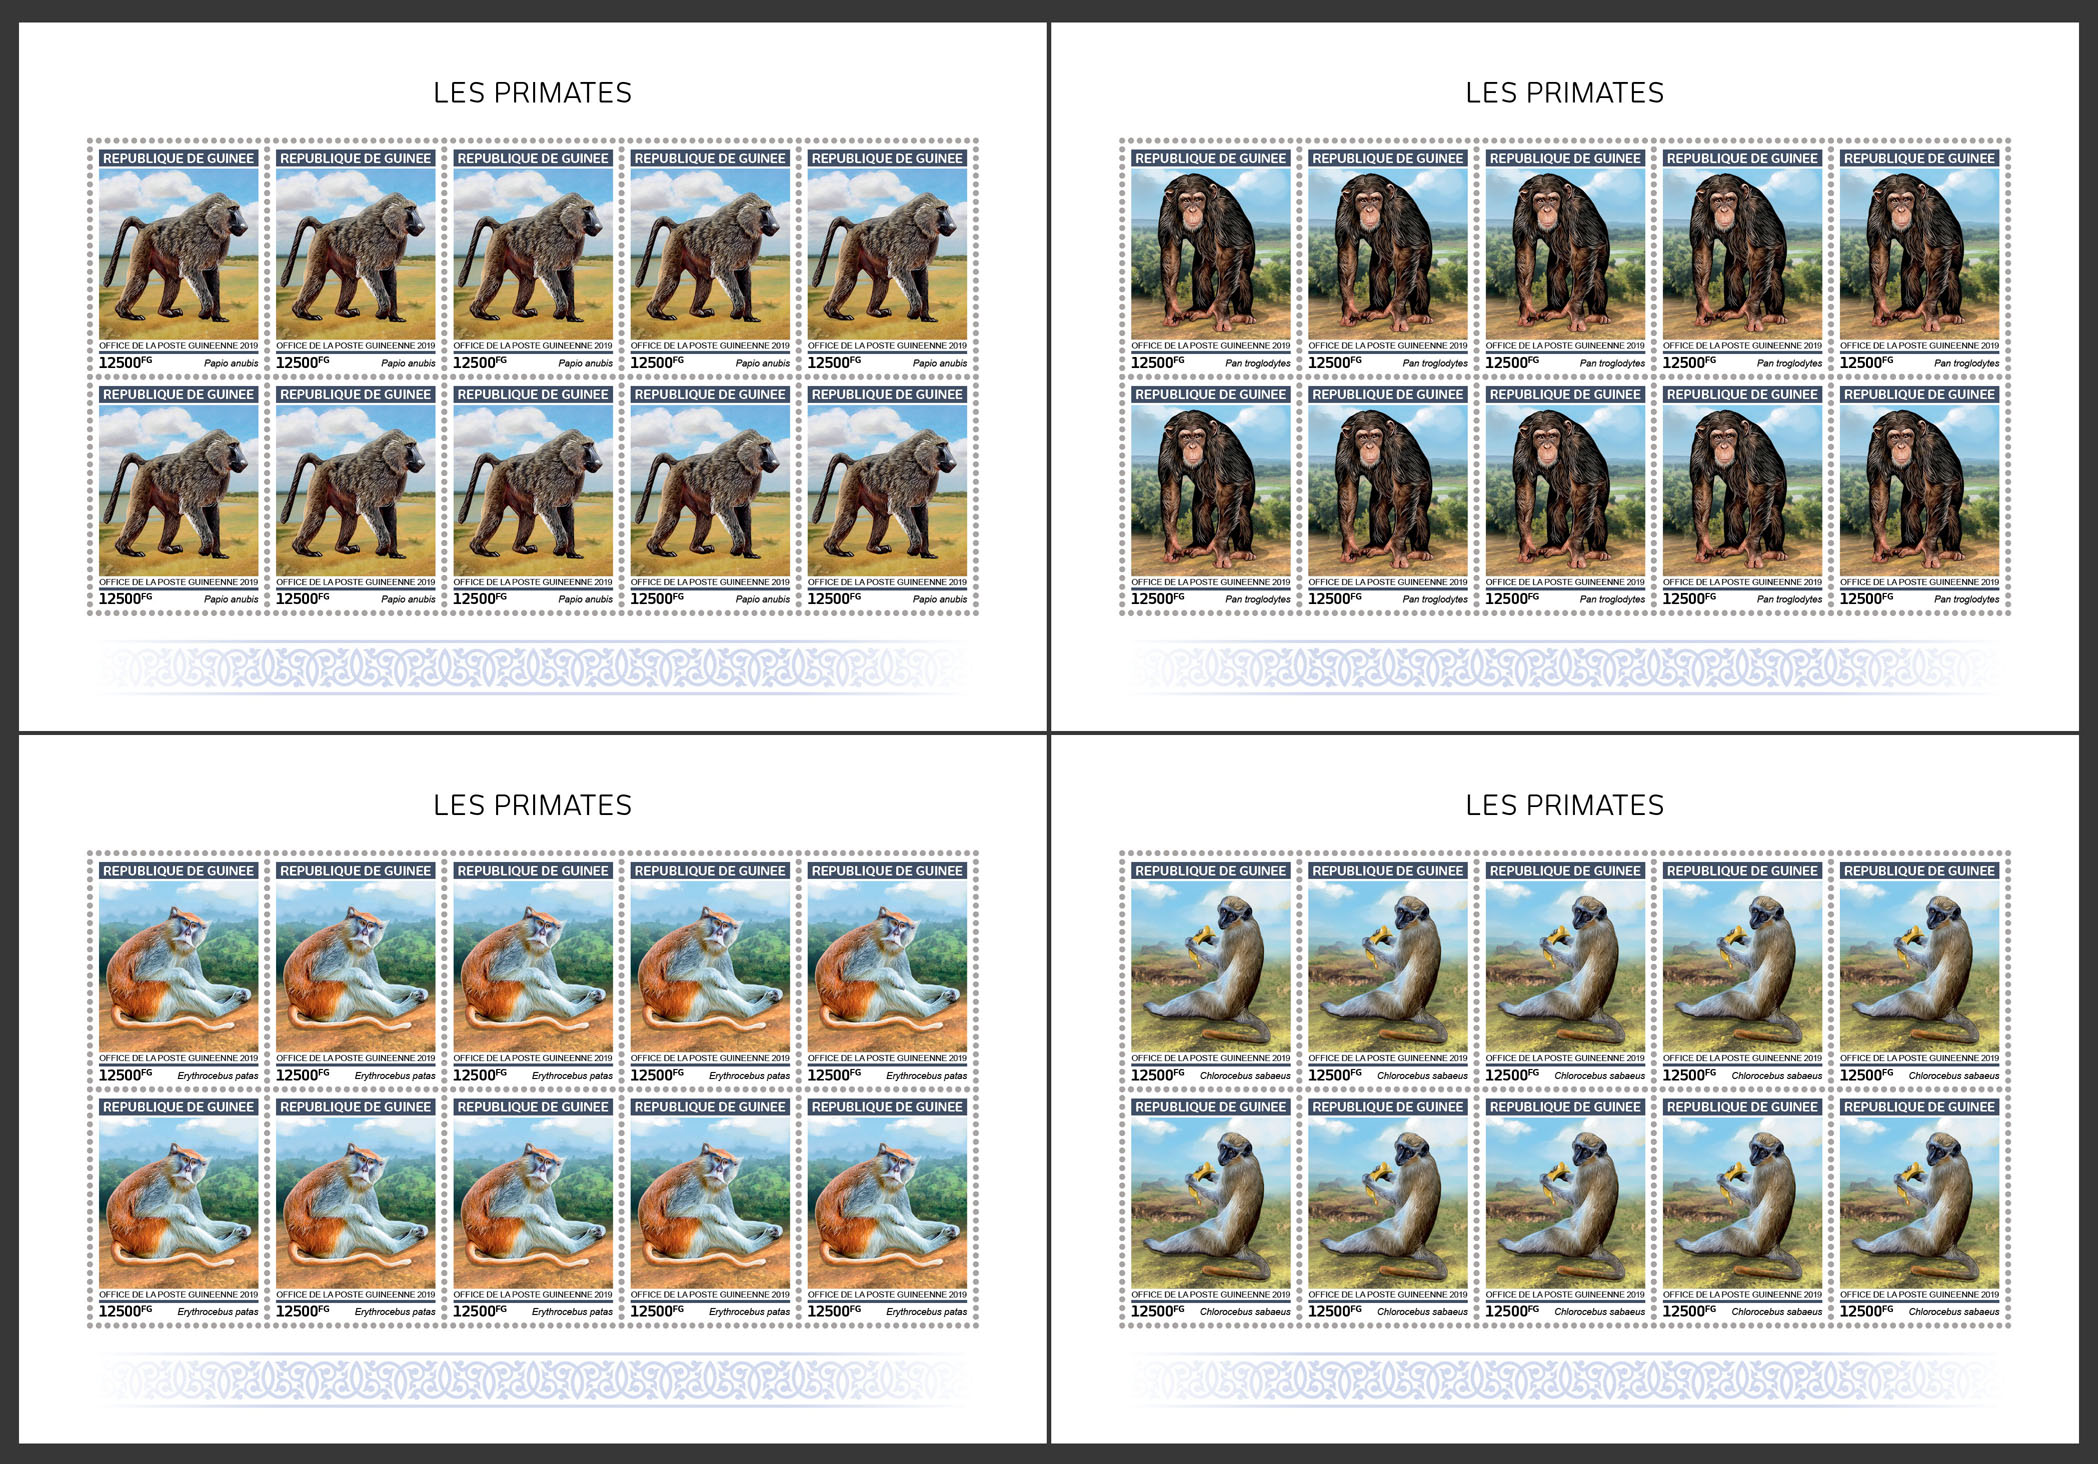 Primates - Issue of Guinée postage stamps